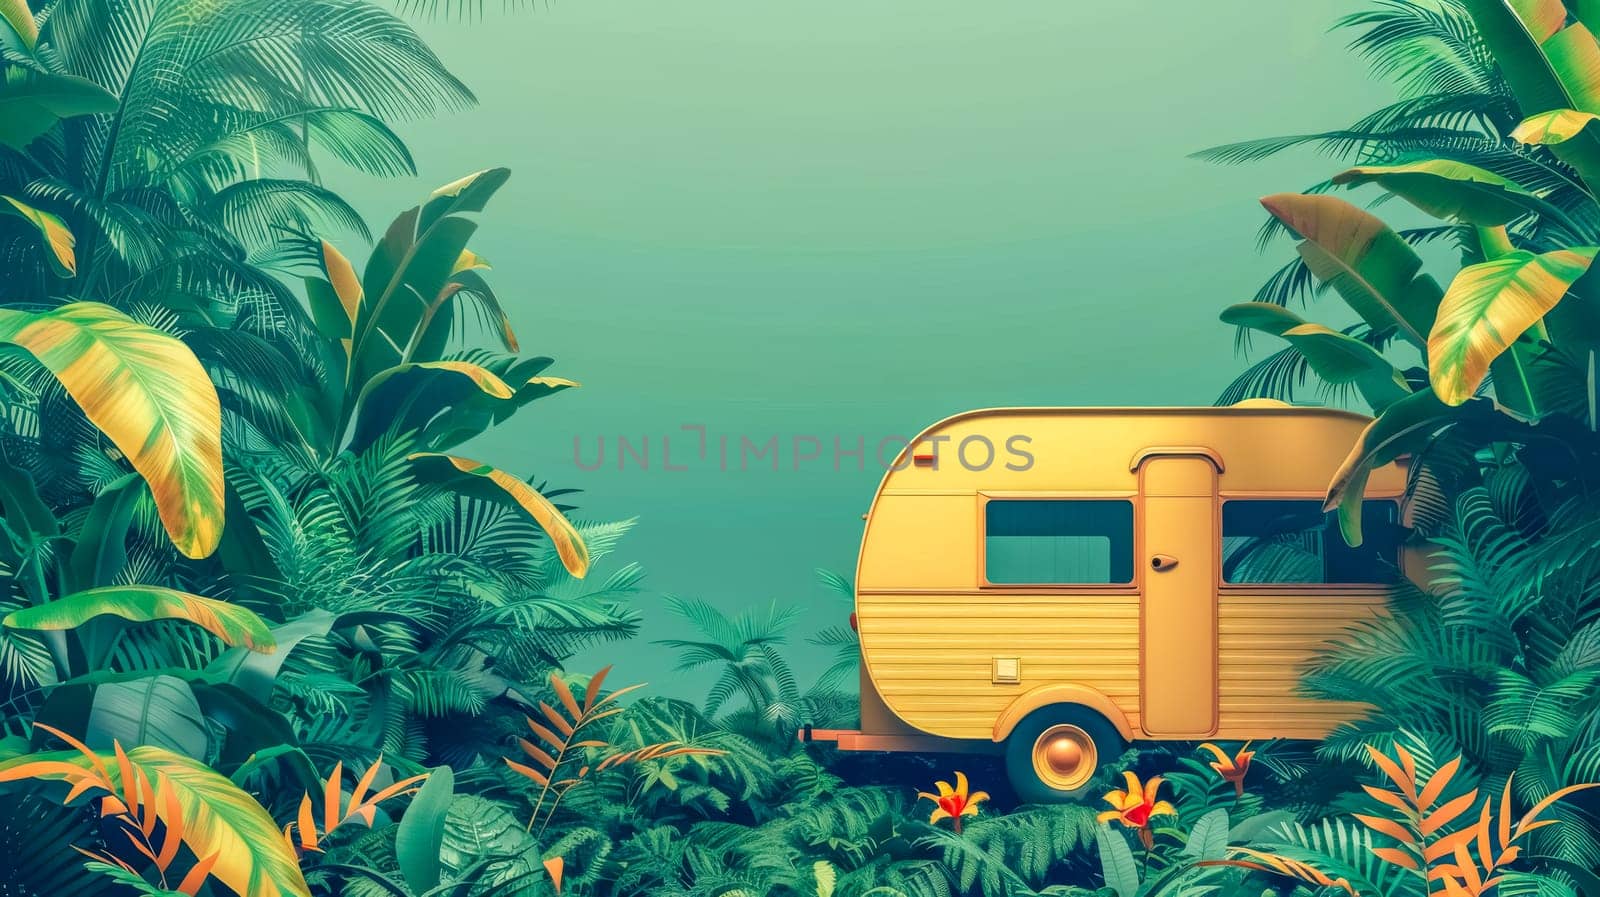 Stylized vintage caravan surrounded by lush tropical foliage and flowers